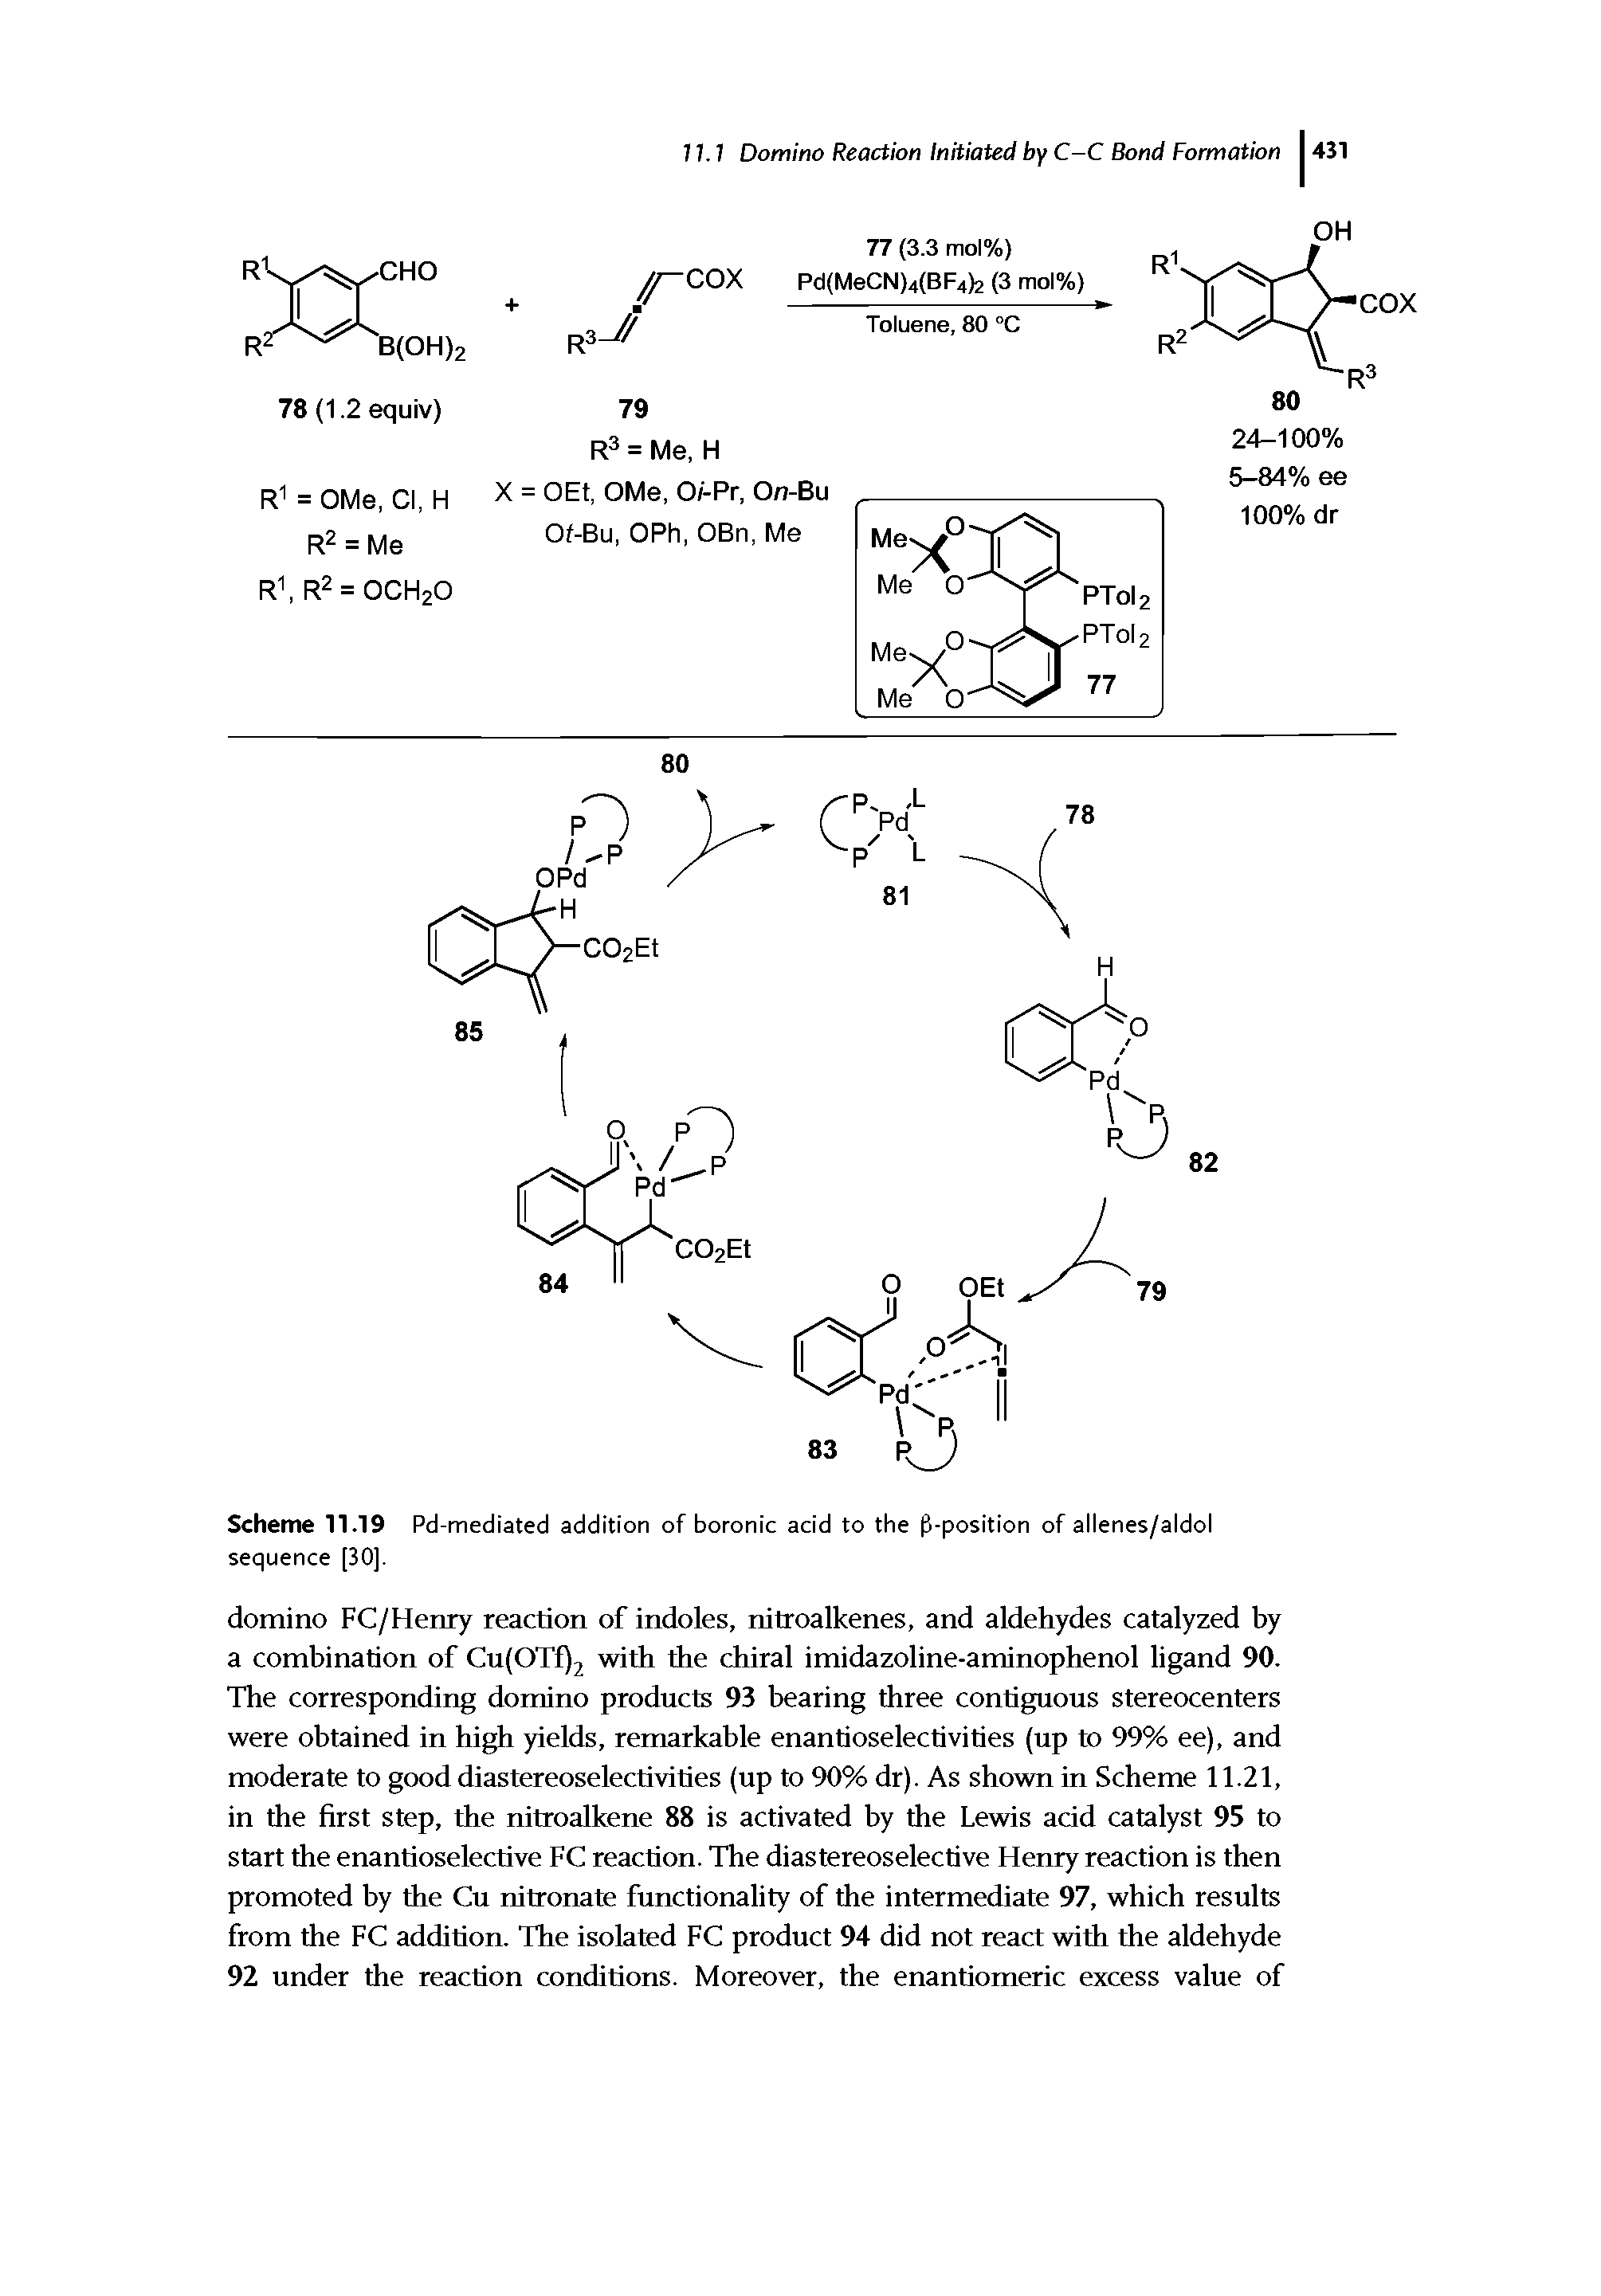 Scheme 11.19 Pd-mediated addition of boronic acid to the fl-position of allenes/aldol sequence [30].